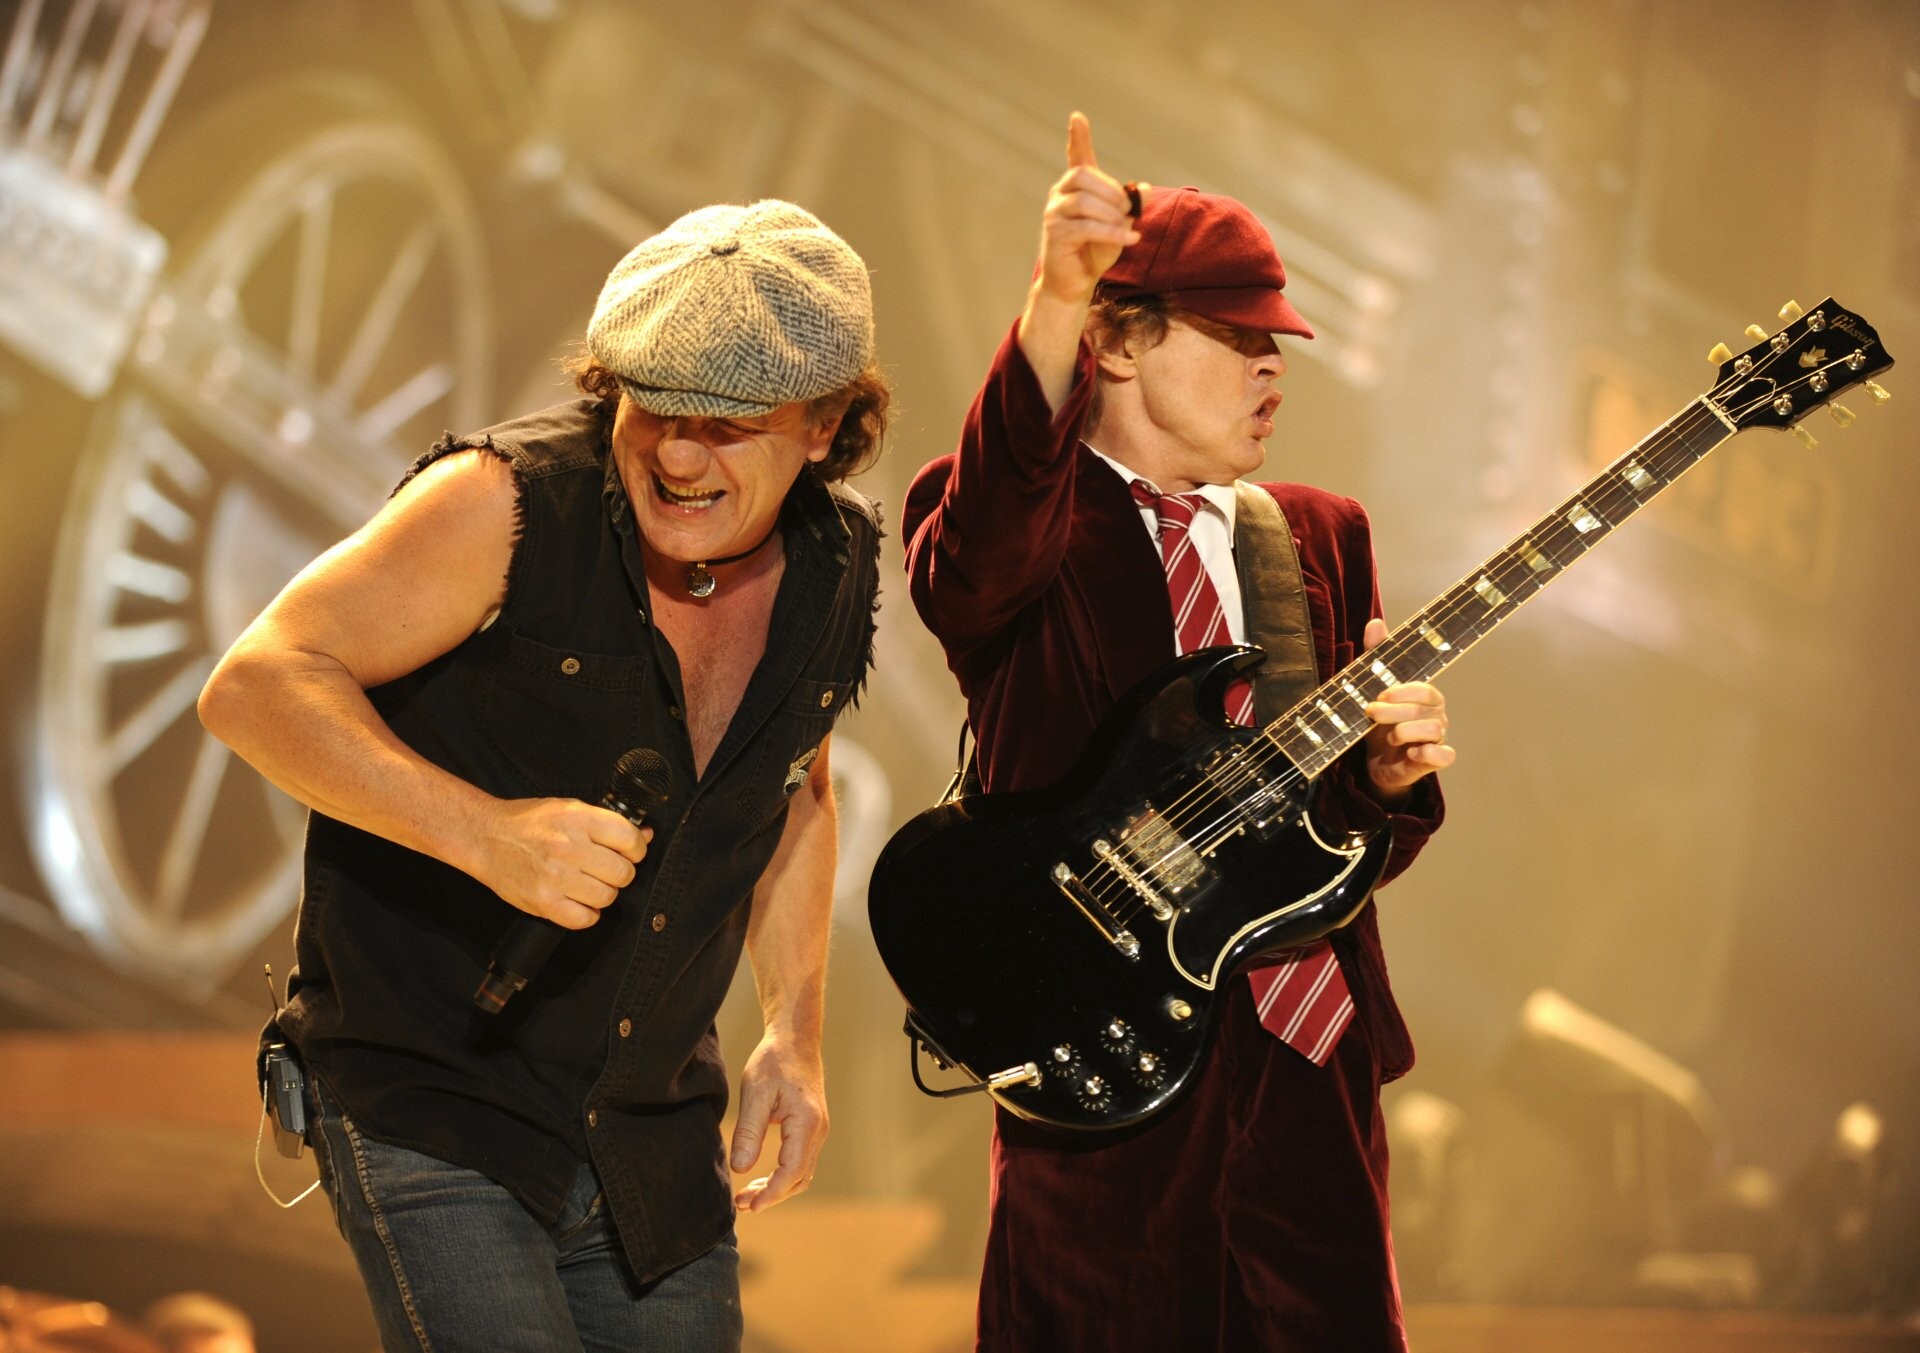 10 4K Ultra HD AC/DC wallpapers, High voltage rock, Iconic stage presence, Rock music icons, 1920x1360 HD Desktop